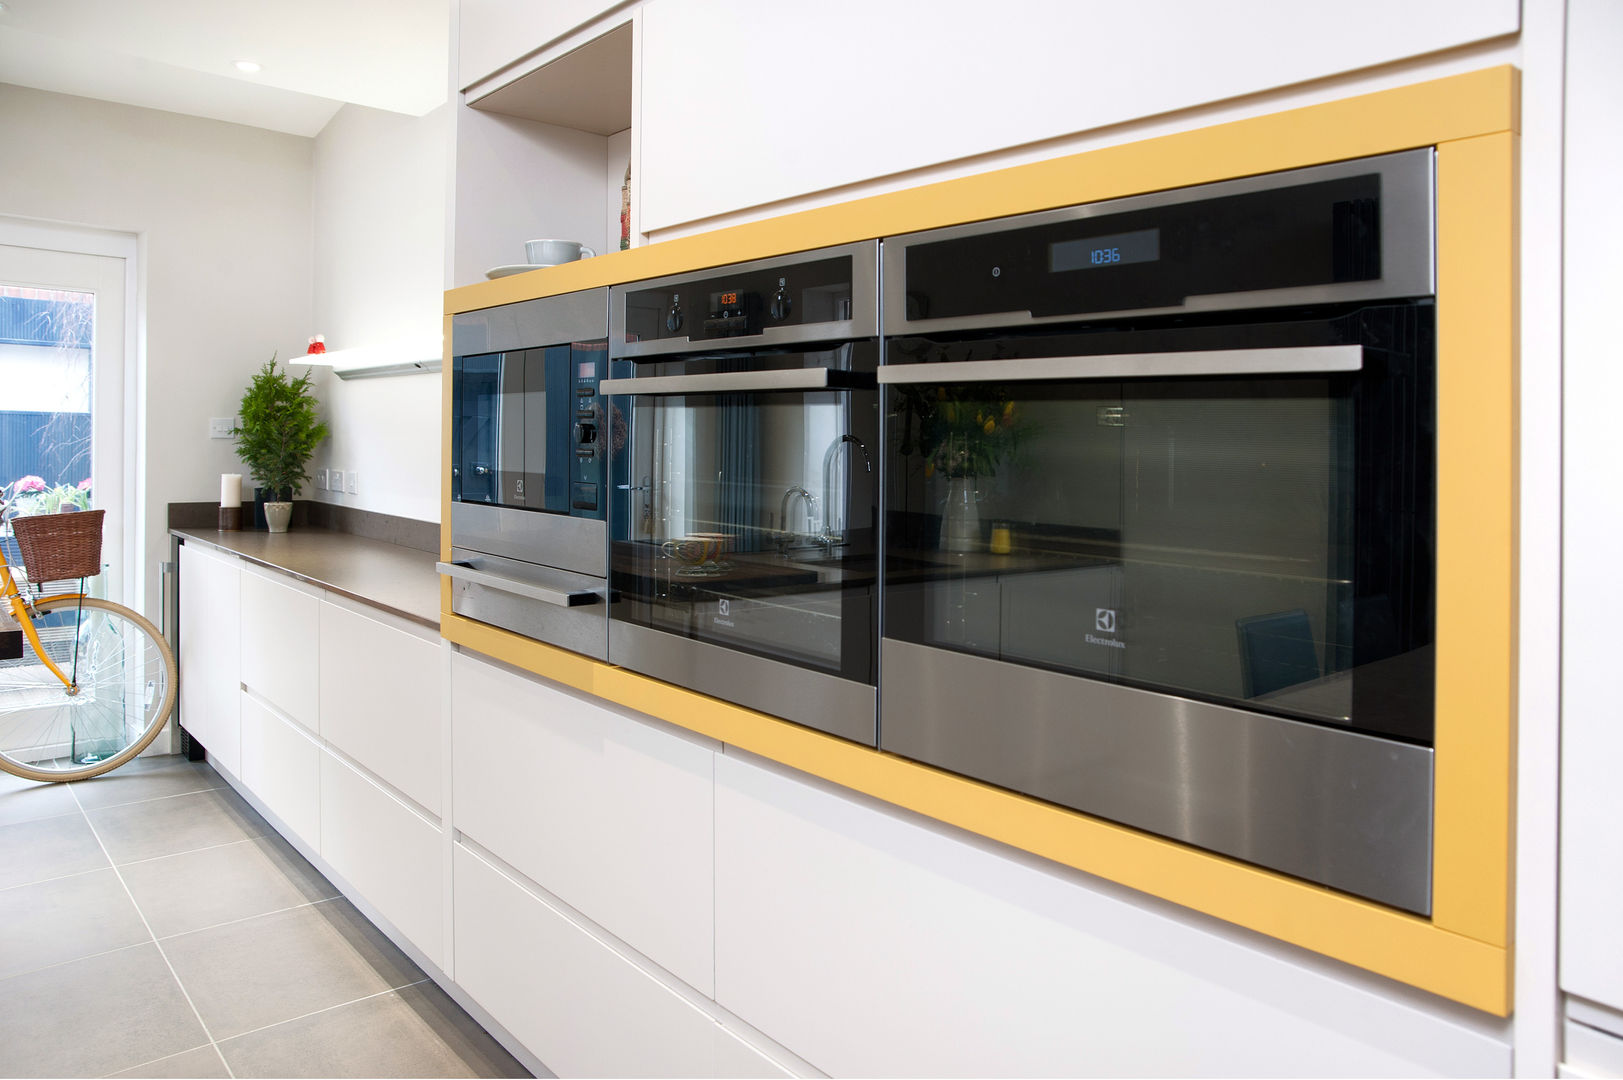 Electrolux appliances wrapped in Curry Yellow panelling Haus12 Interiors Moderne keukens